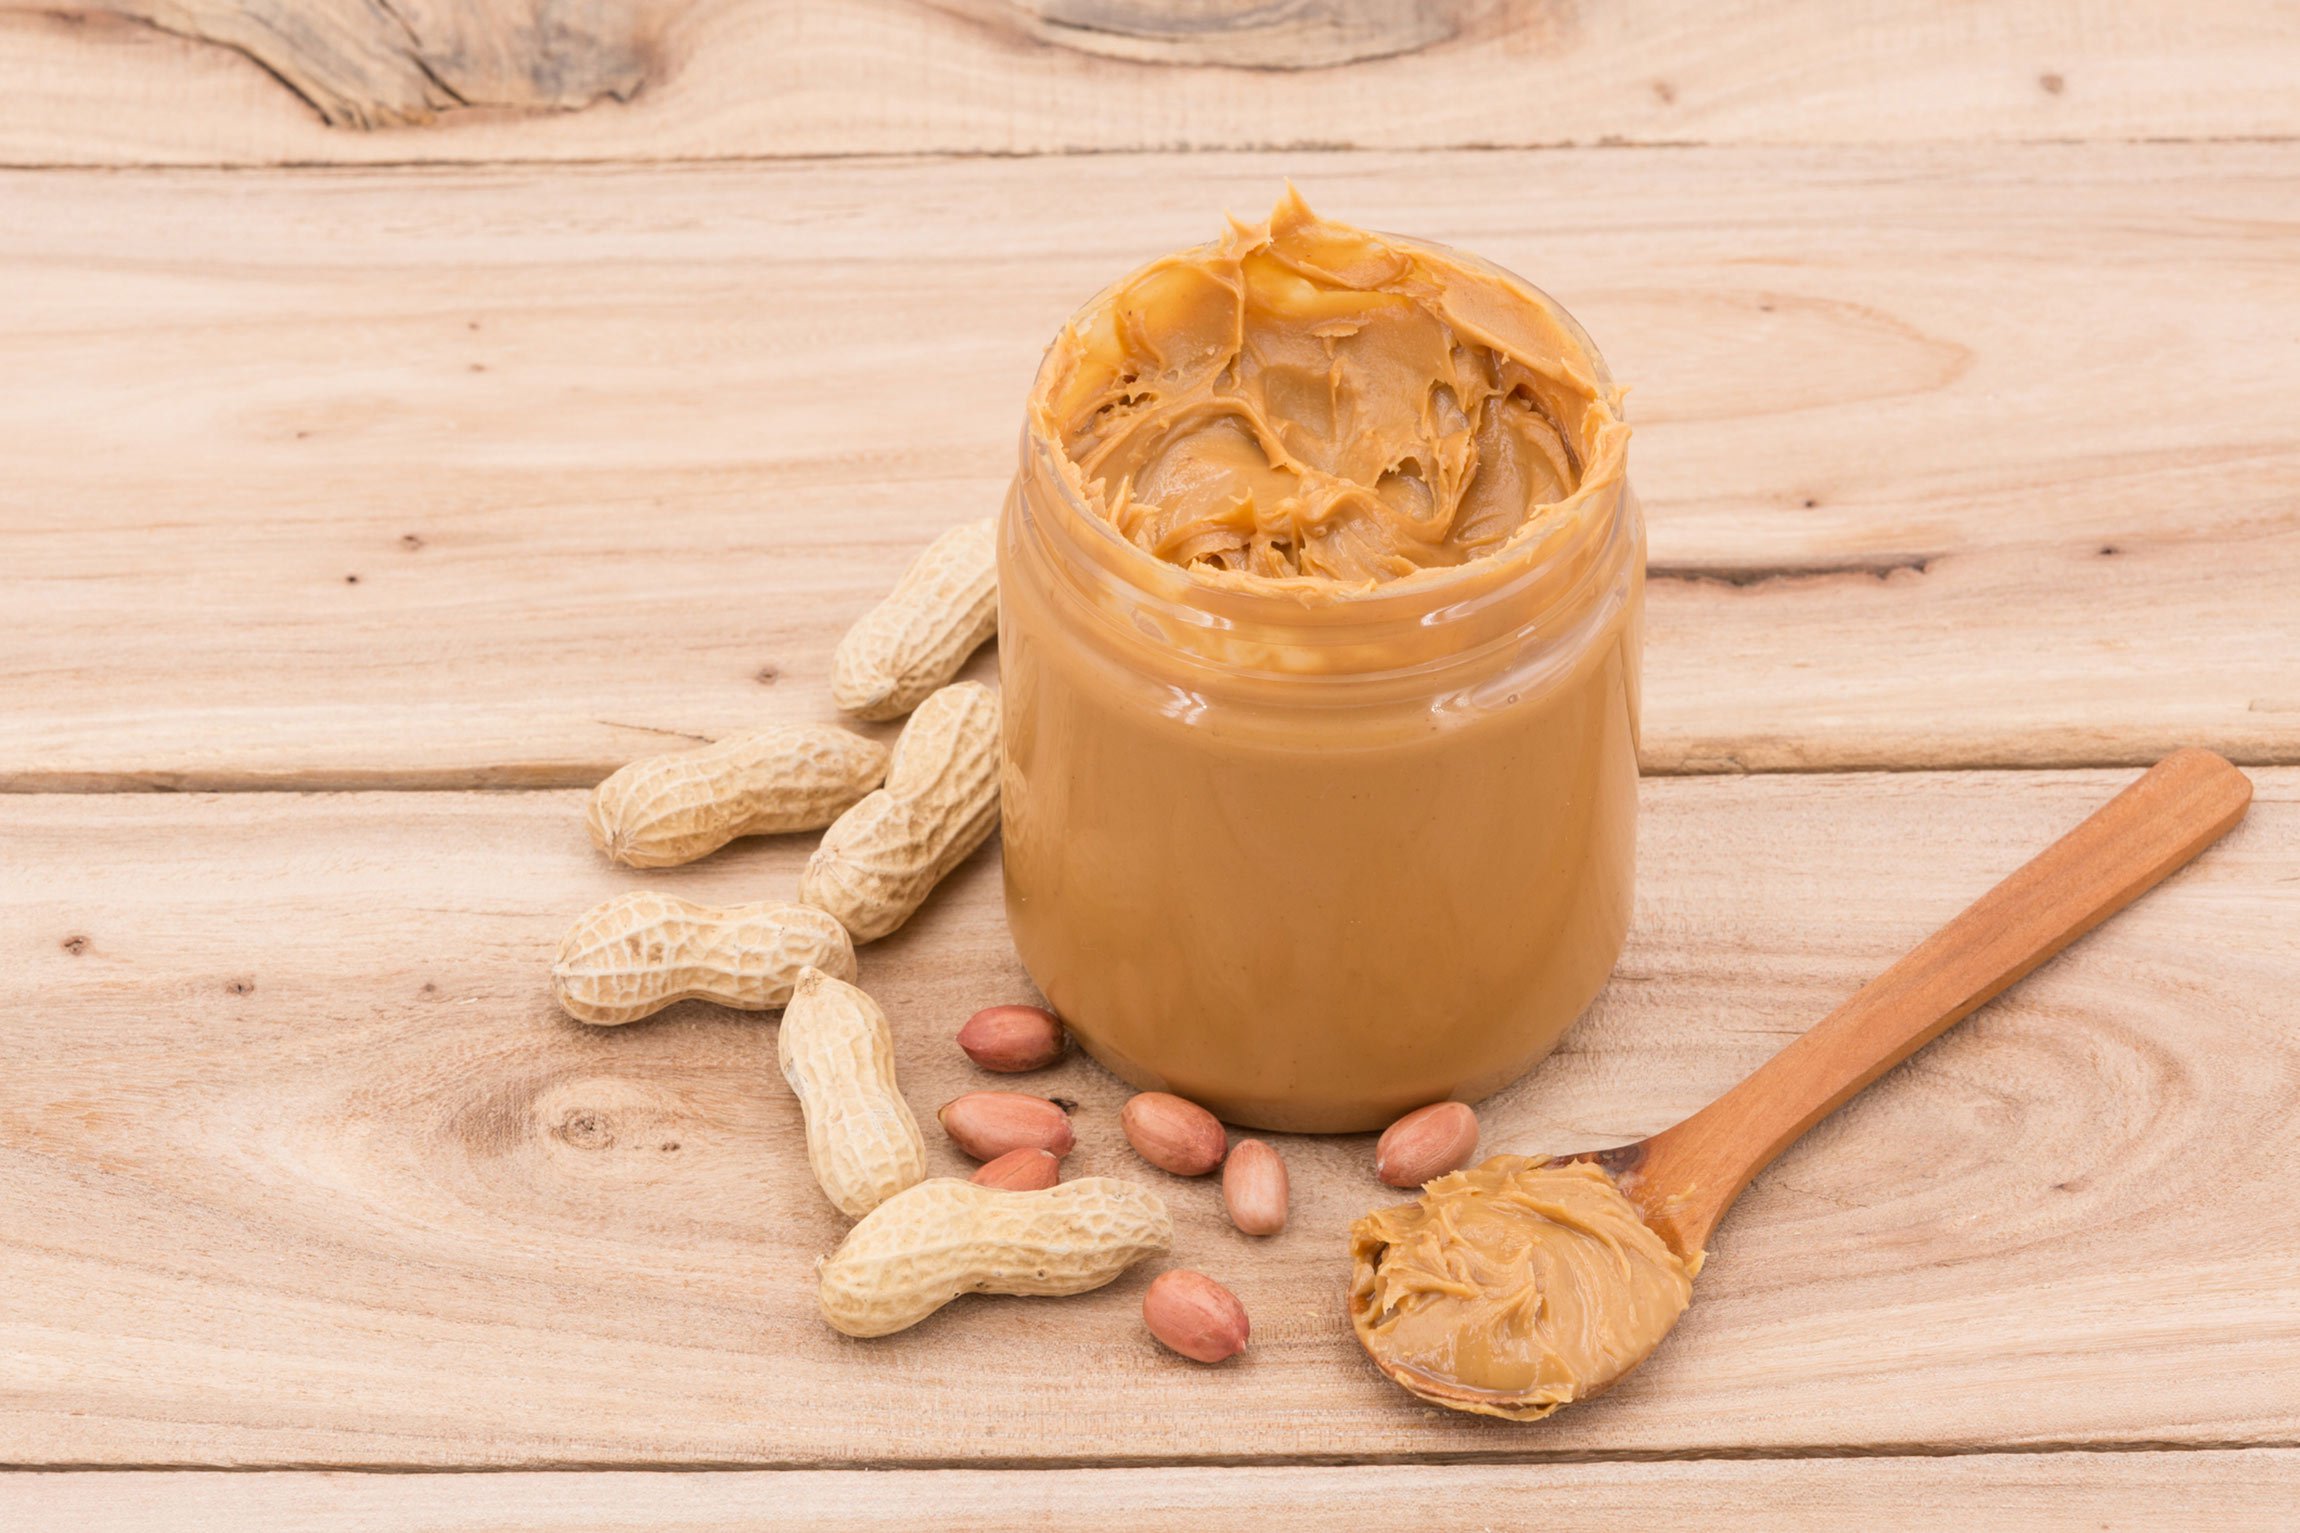 A jar of peanut butter with peanuts on a wooden table